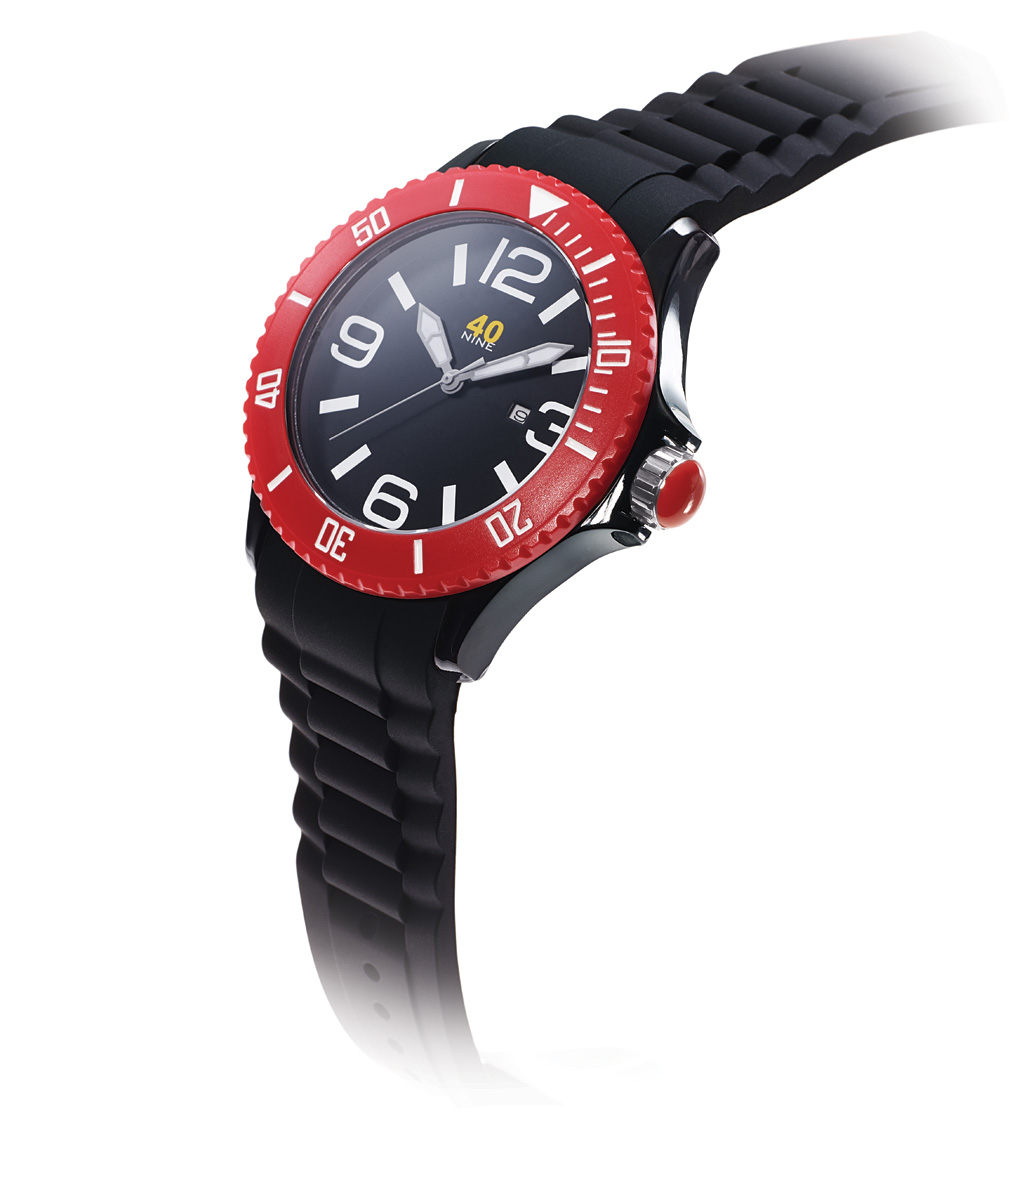 40Nine Black and Red Watch